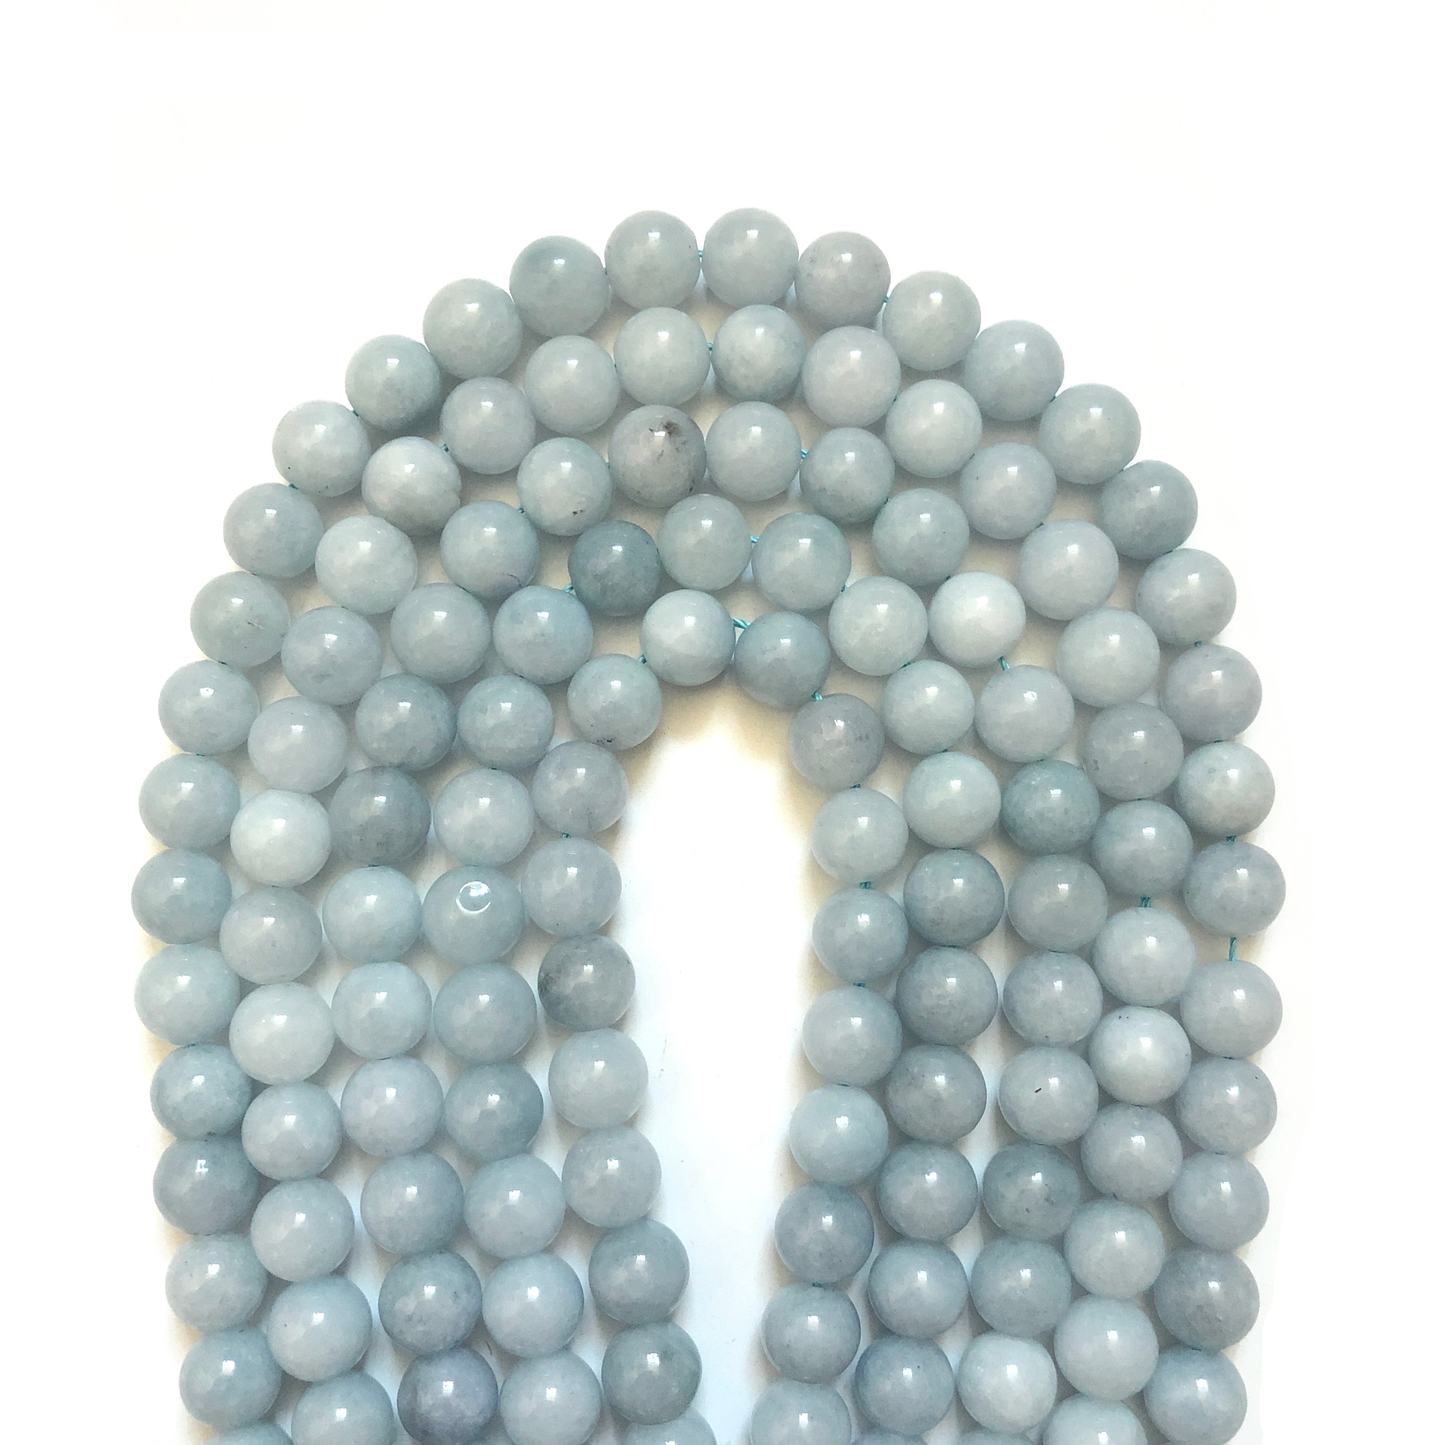 2 Strands/lot 10mm Multicolor Quartz Round Stone Beads Light Blue Aquamarines Stone Beads New Beads Arrivals Other Stone Beads Charms Beads Beyond